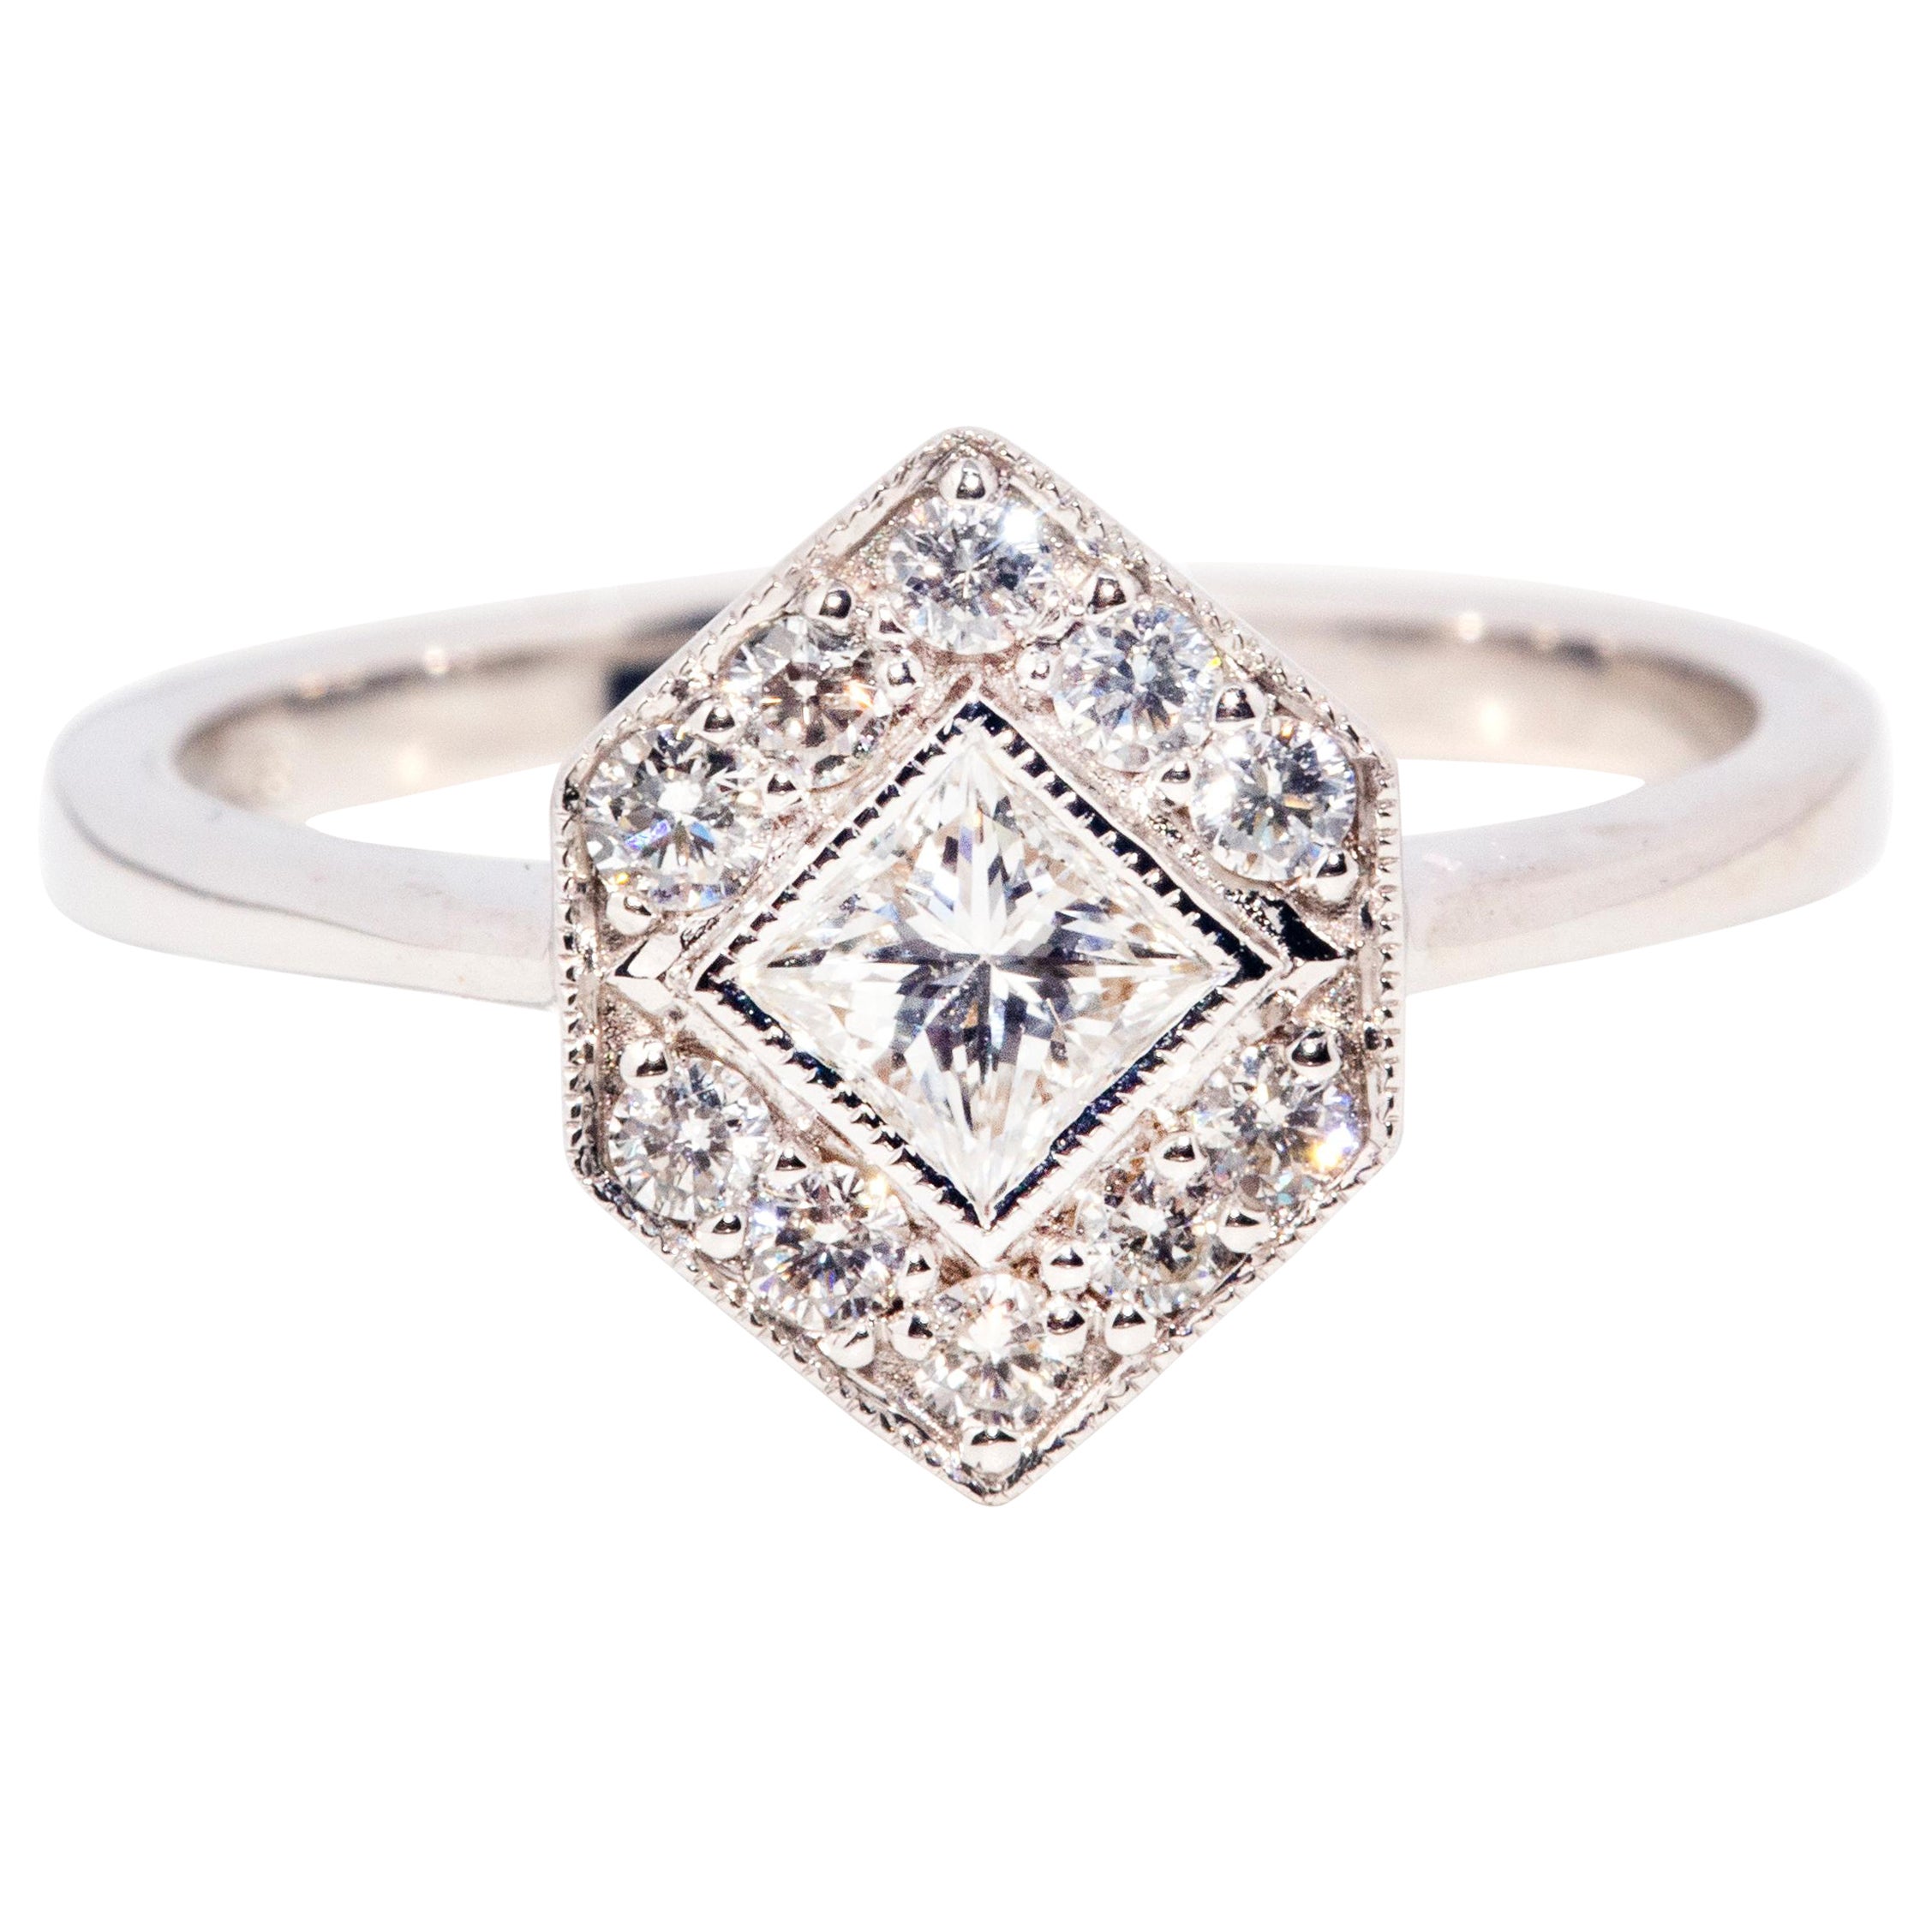 White Gold, 1.30ct Princess Cut Diamond And Diamond Engagement Ring  Available For Immediate Sale At Sotheby's